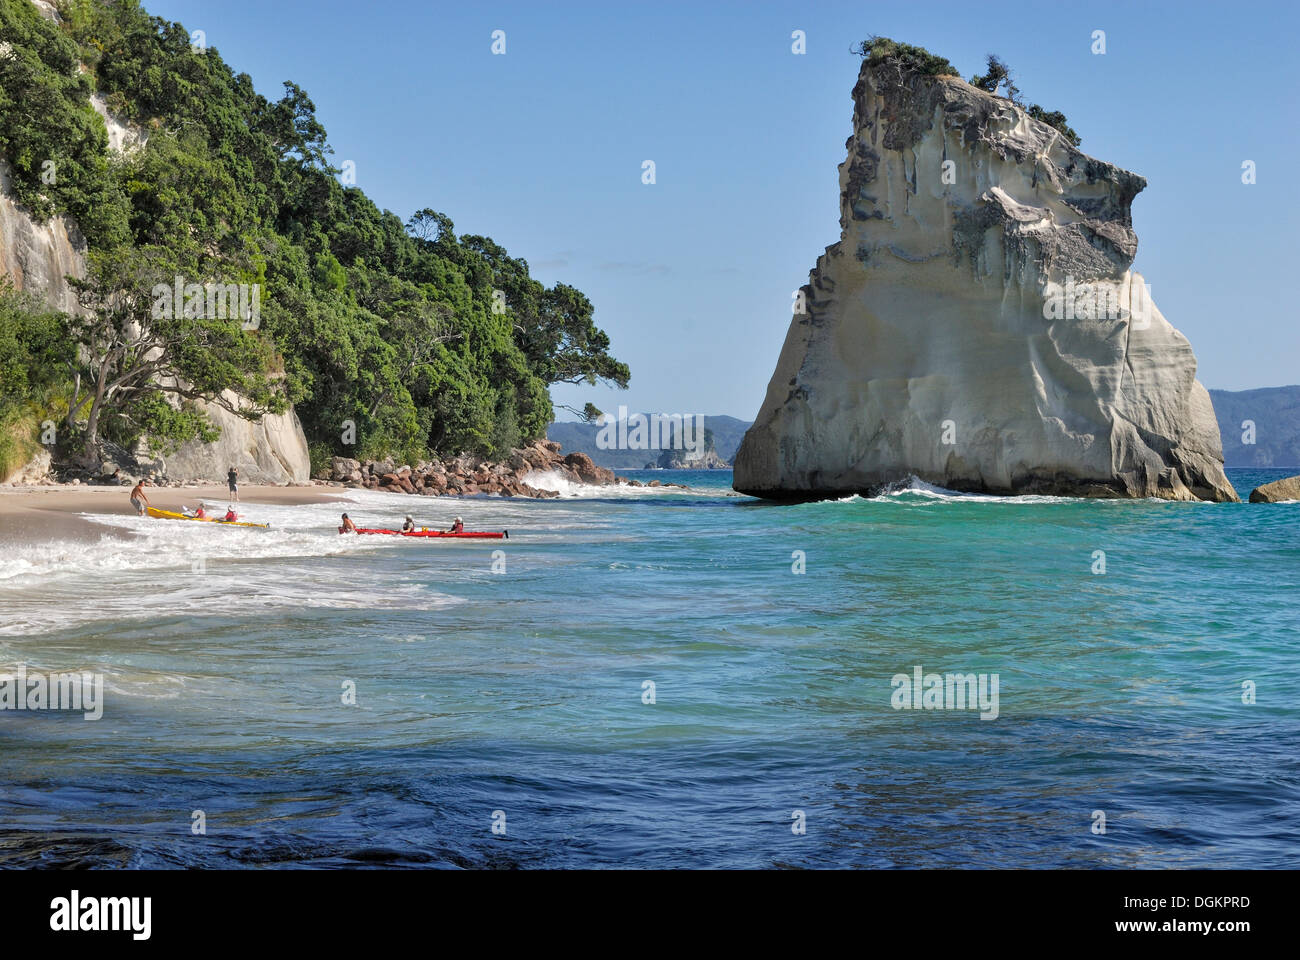 Rock in the shallow waters of the Marine Reserve Cathedral Cove, Hahei, Coromandel Peninsula, North Island, New Zealand Stock Photo